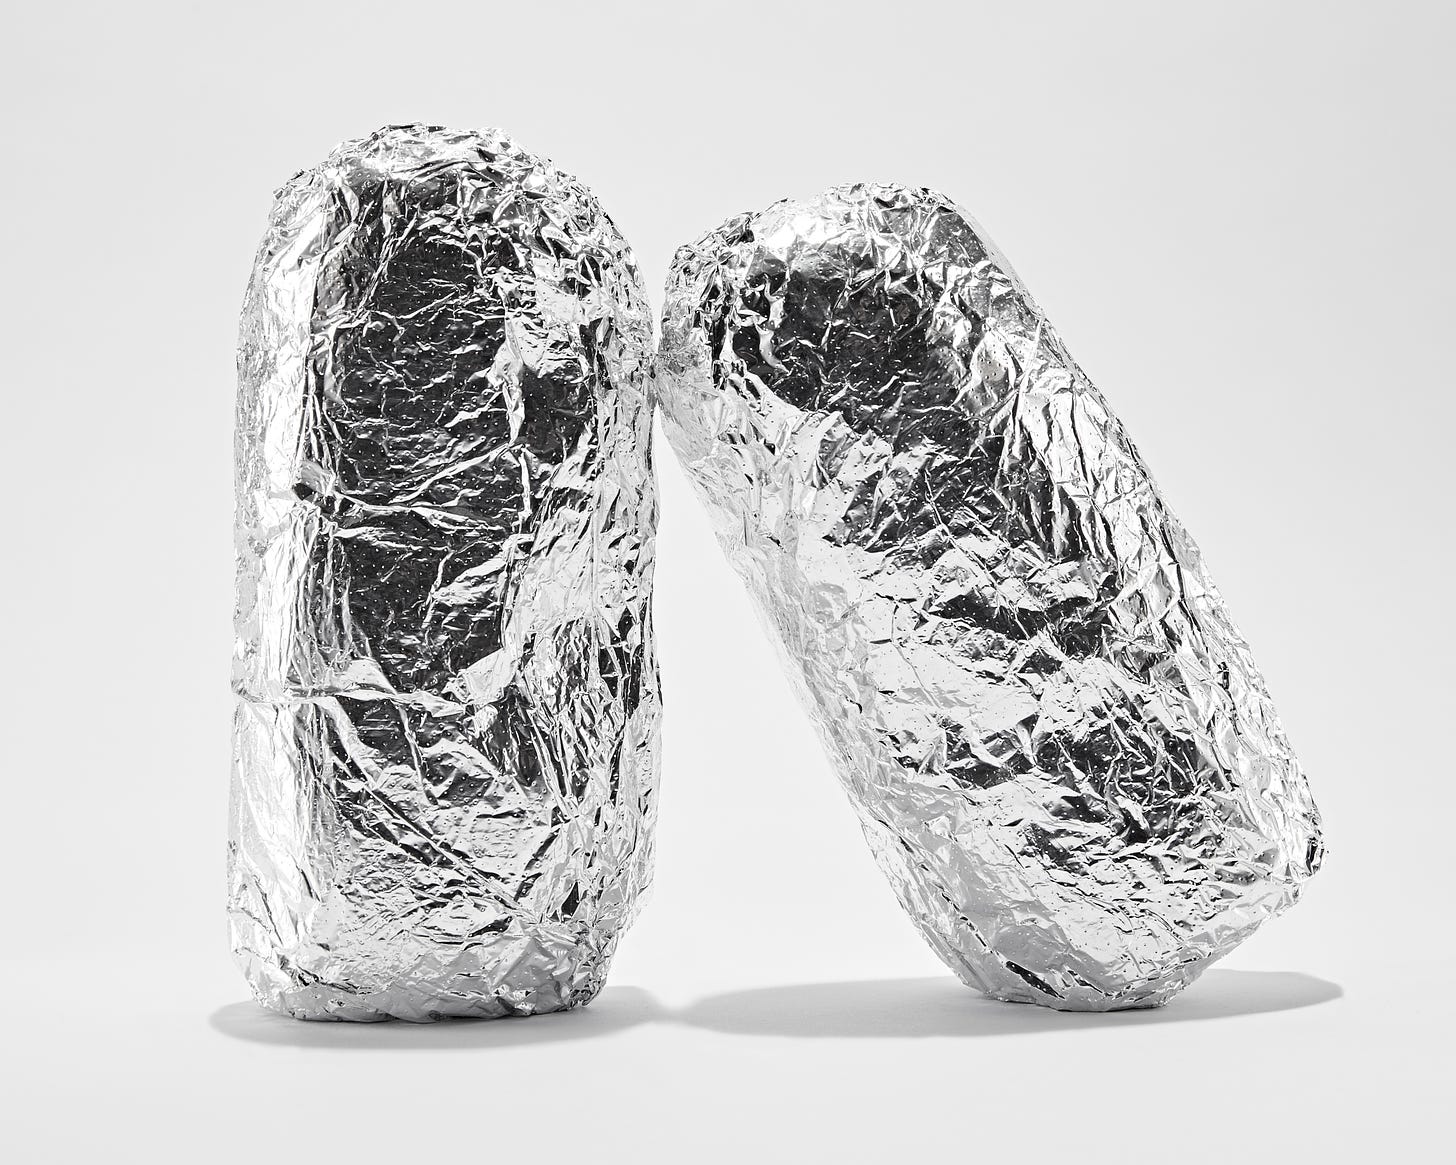 Two foil wrapped subs (I think) standing on end, one leaning on the other in a vaguely humanoid gesture, if that makes sense.